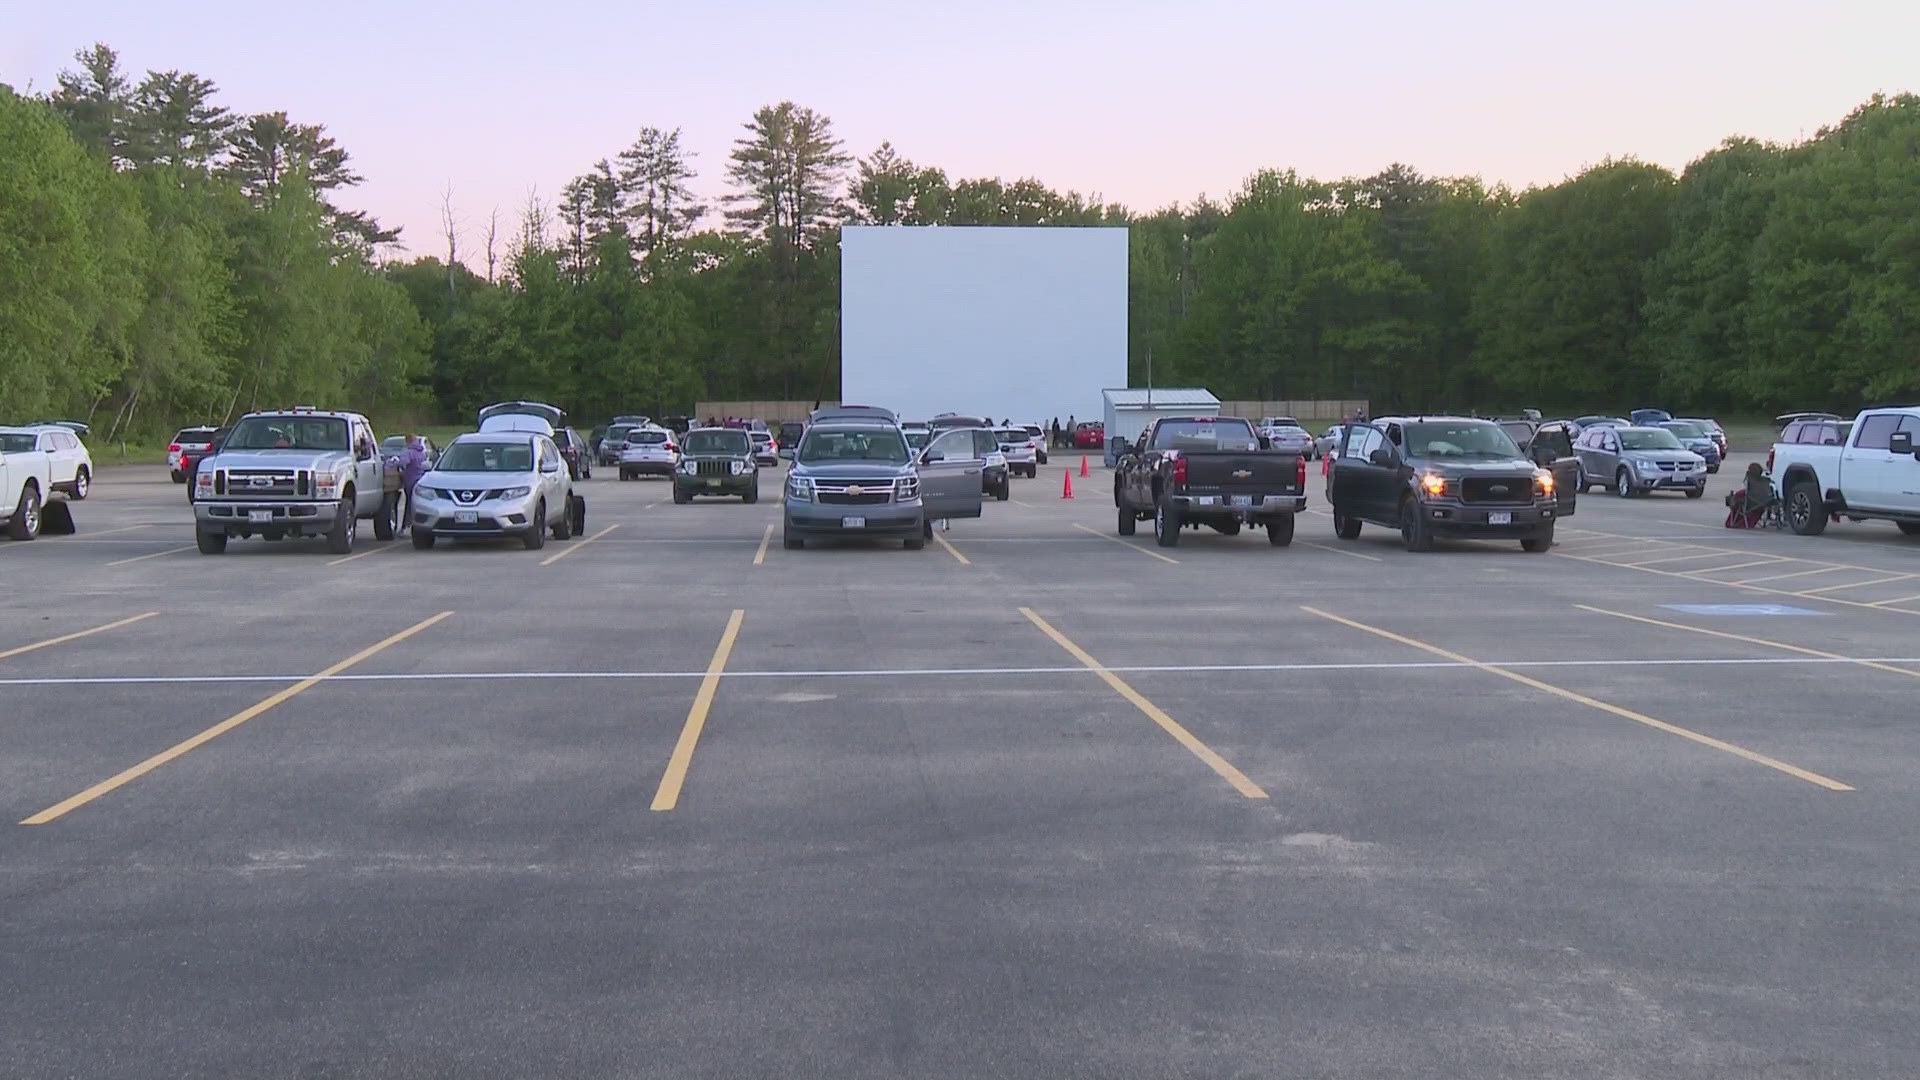 The 83-year-old drive-in closed last year due to pandemic-related challenges, but reopened Friday at Aquaboggan Water Park.